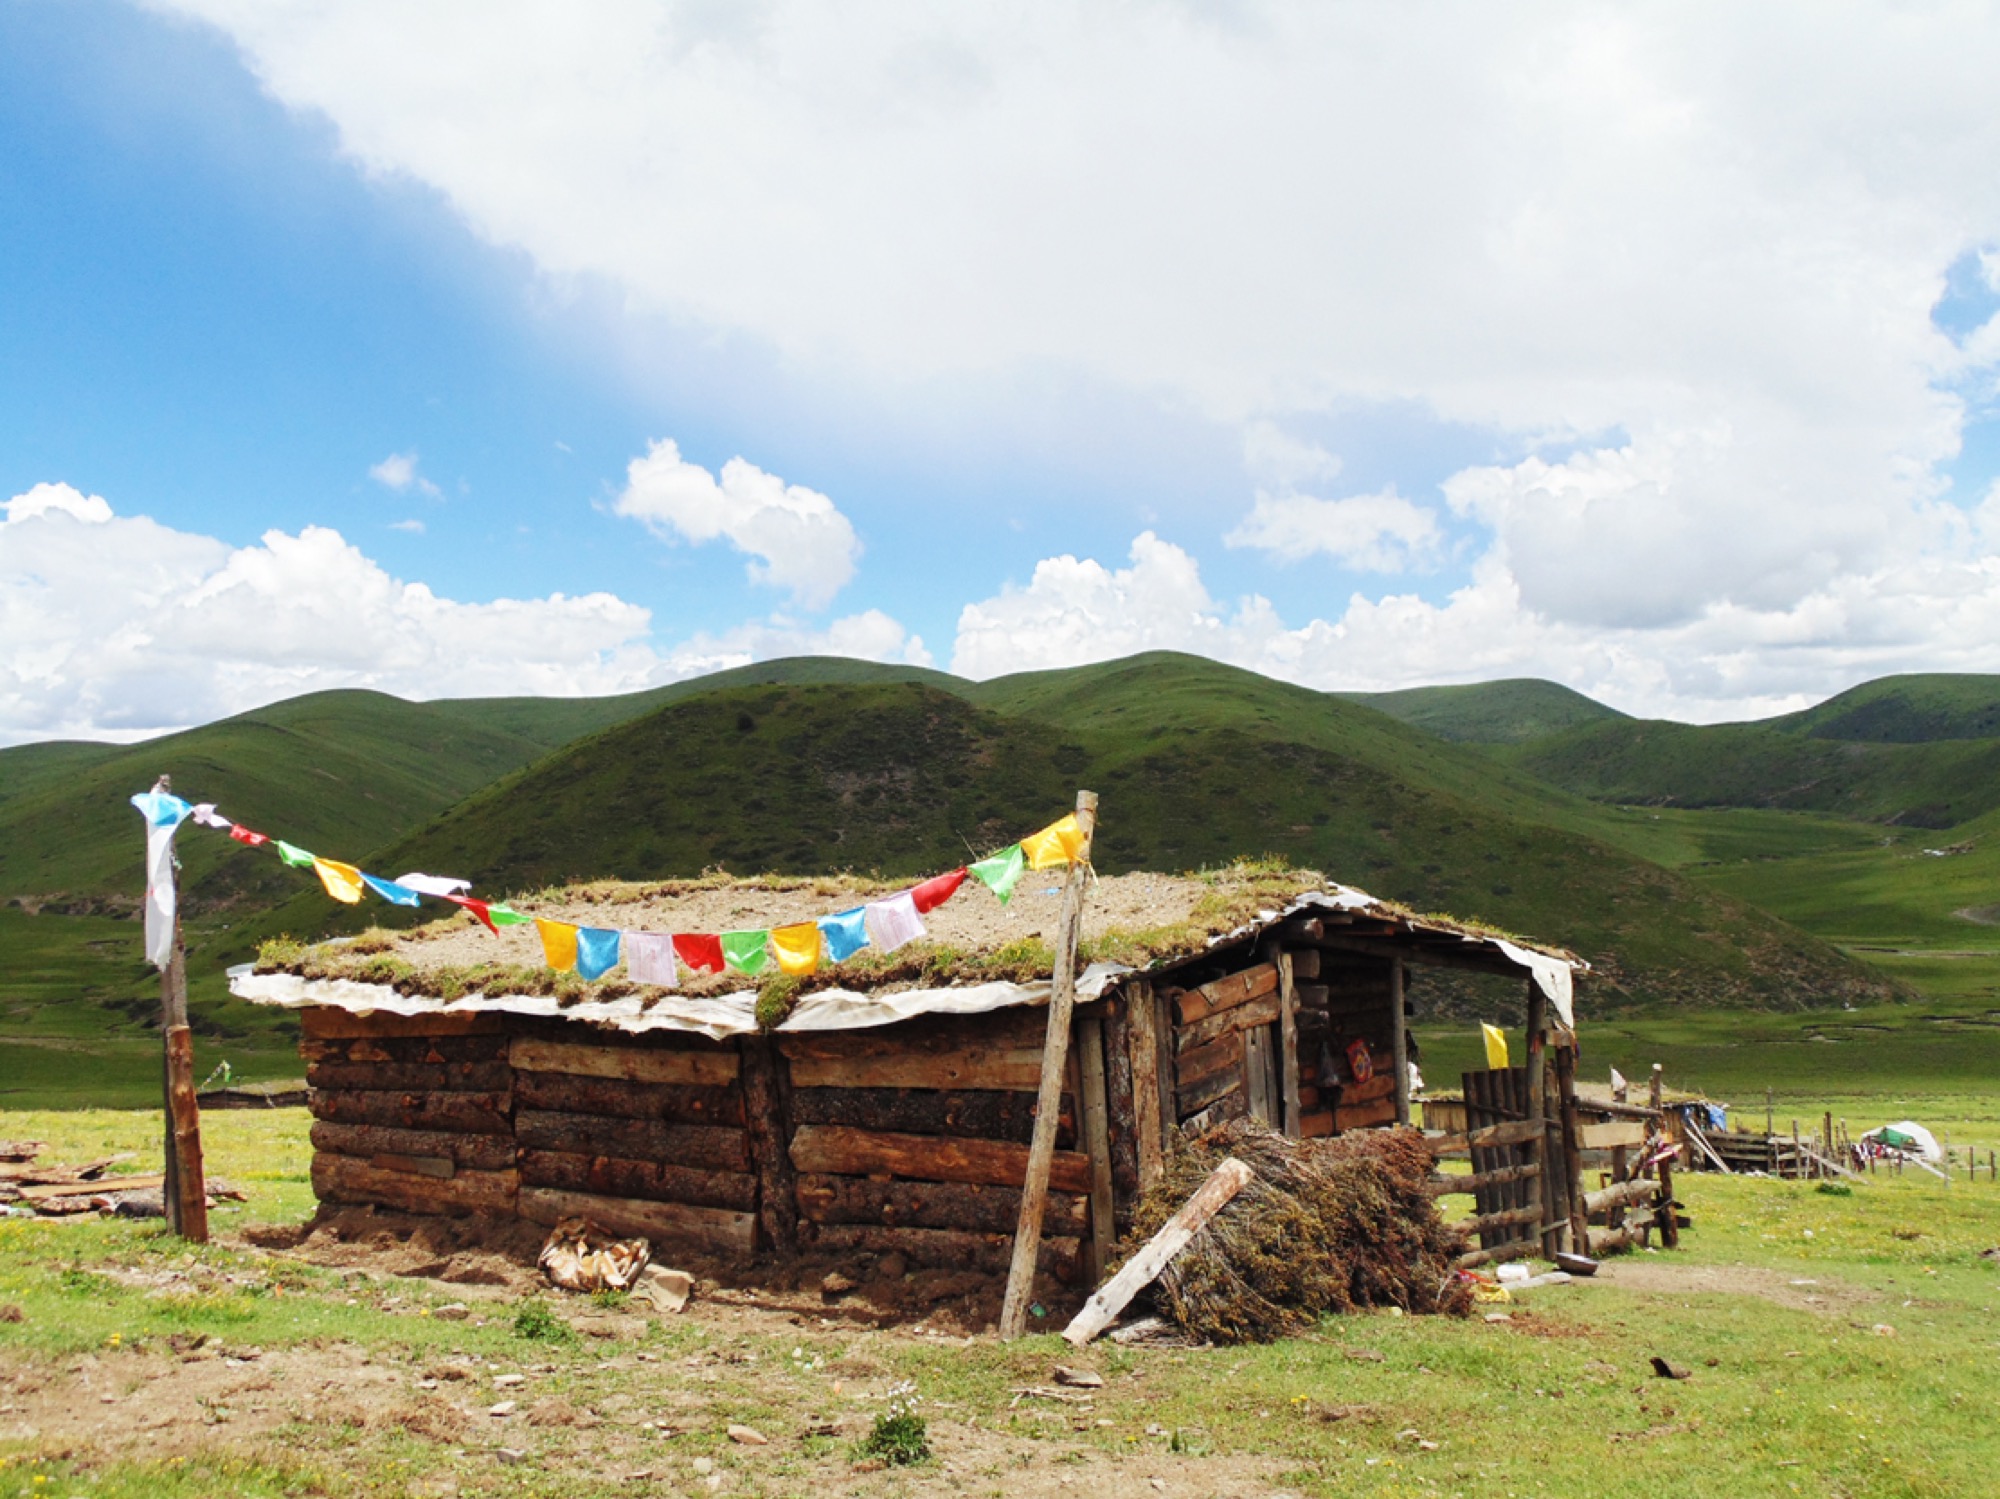 Photostory: Tibet, Towards the Roof of the World, by Arghya Ghosh 43